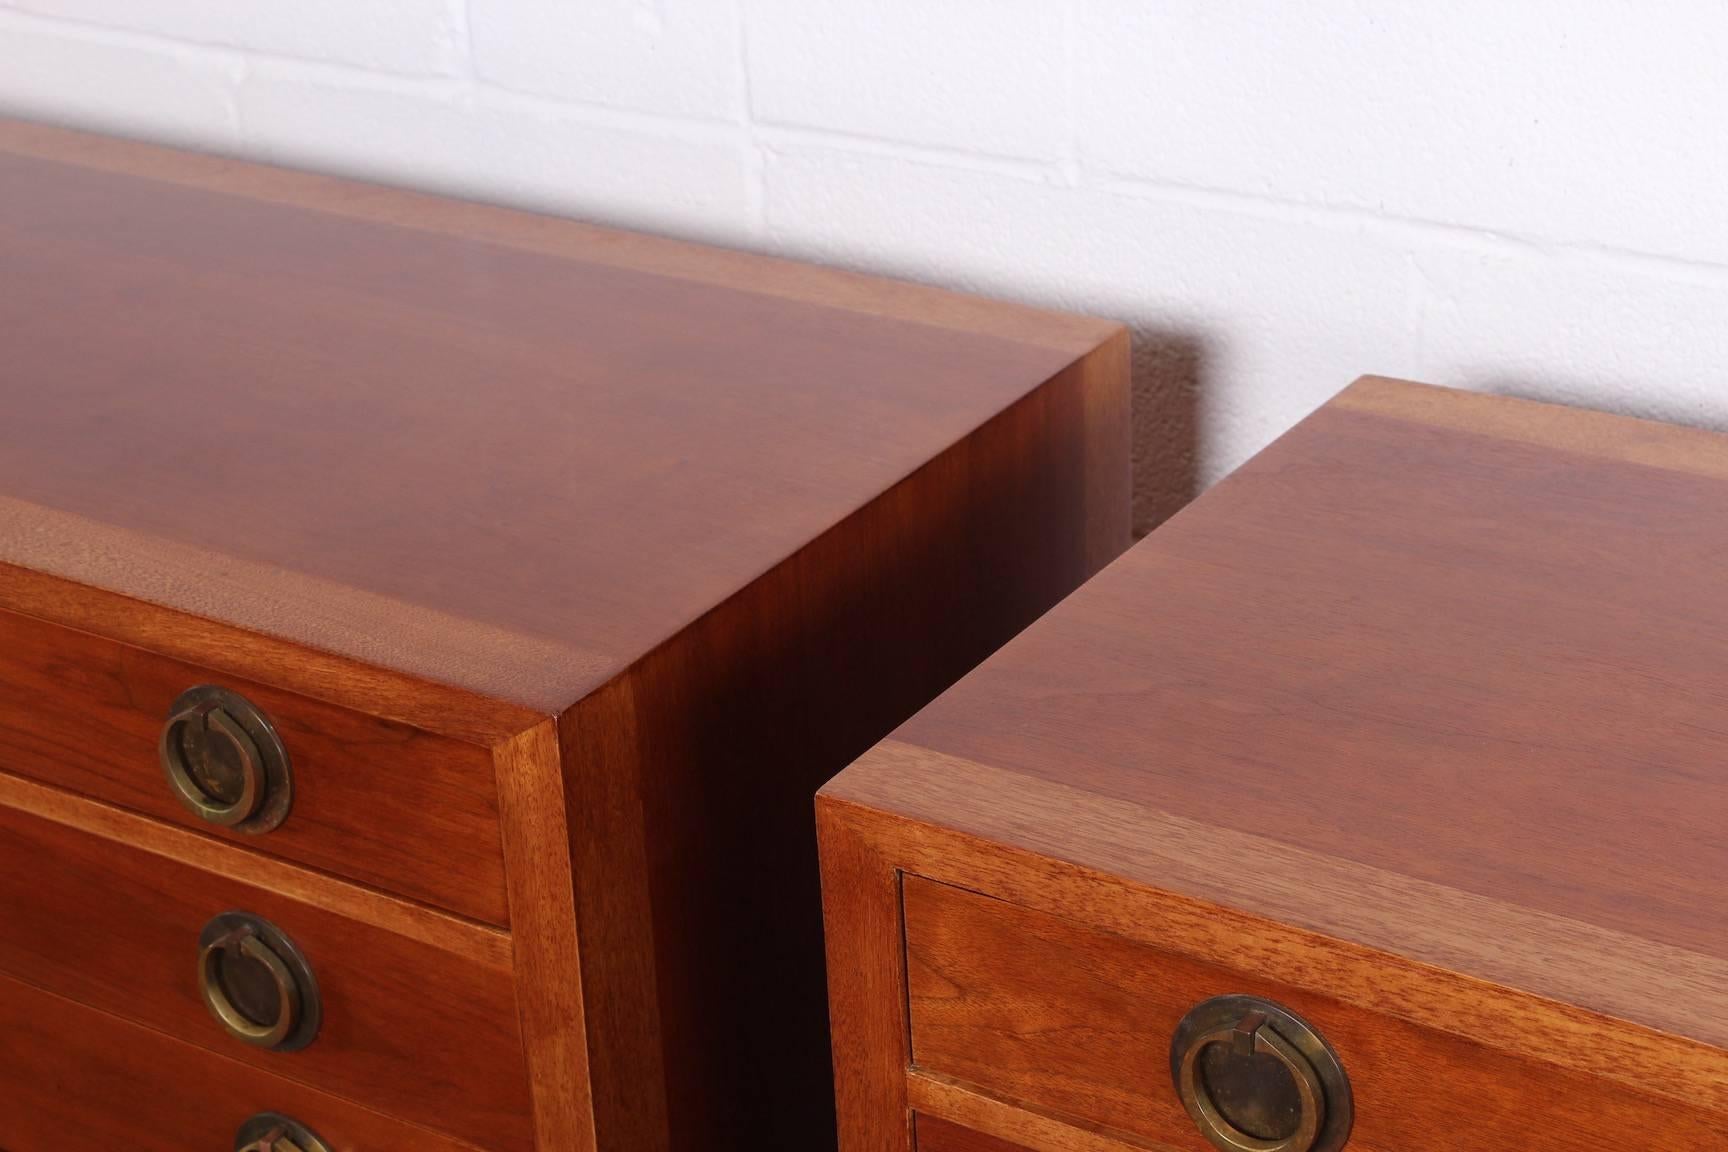 Mid-20th Century Pair of Chests by Edward Wormley for Dunbar